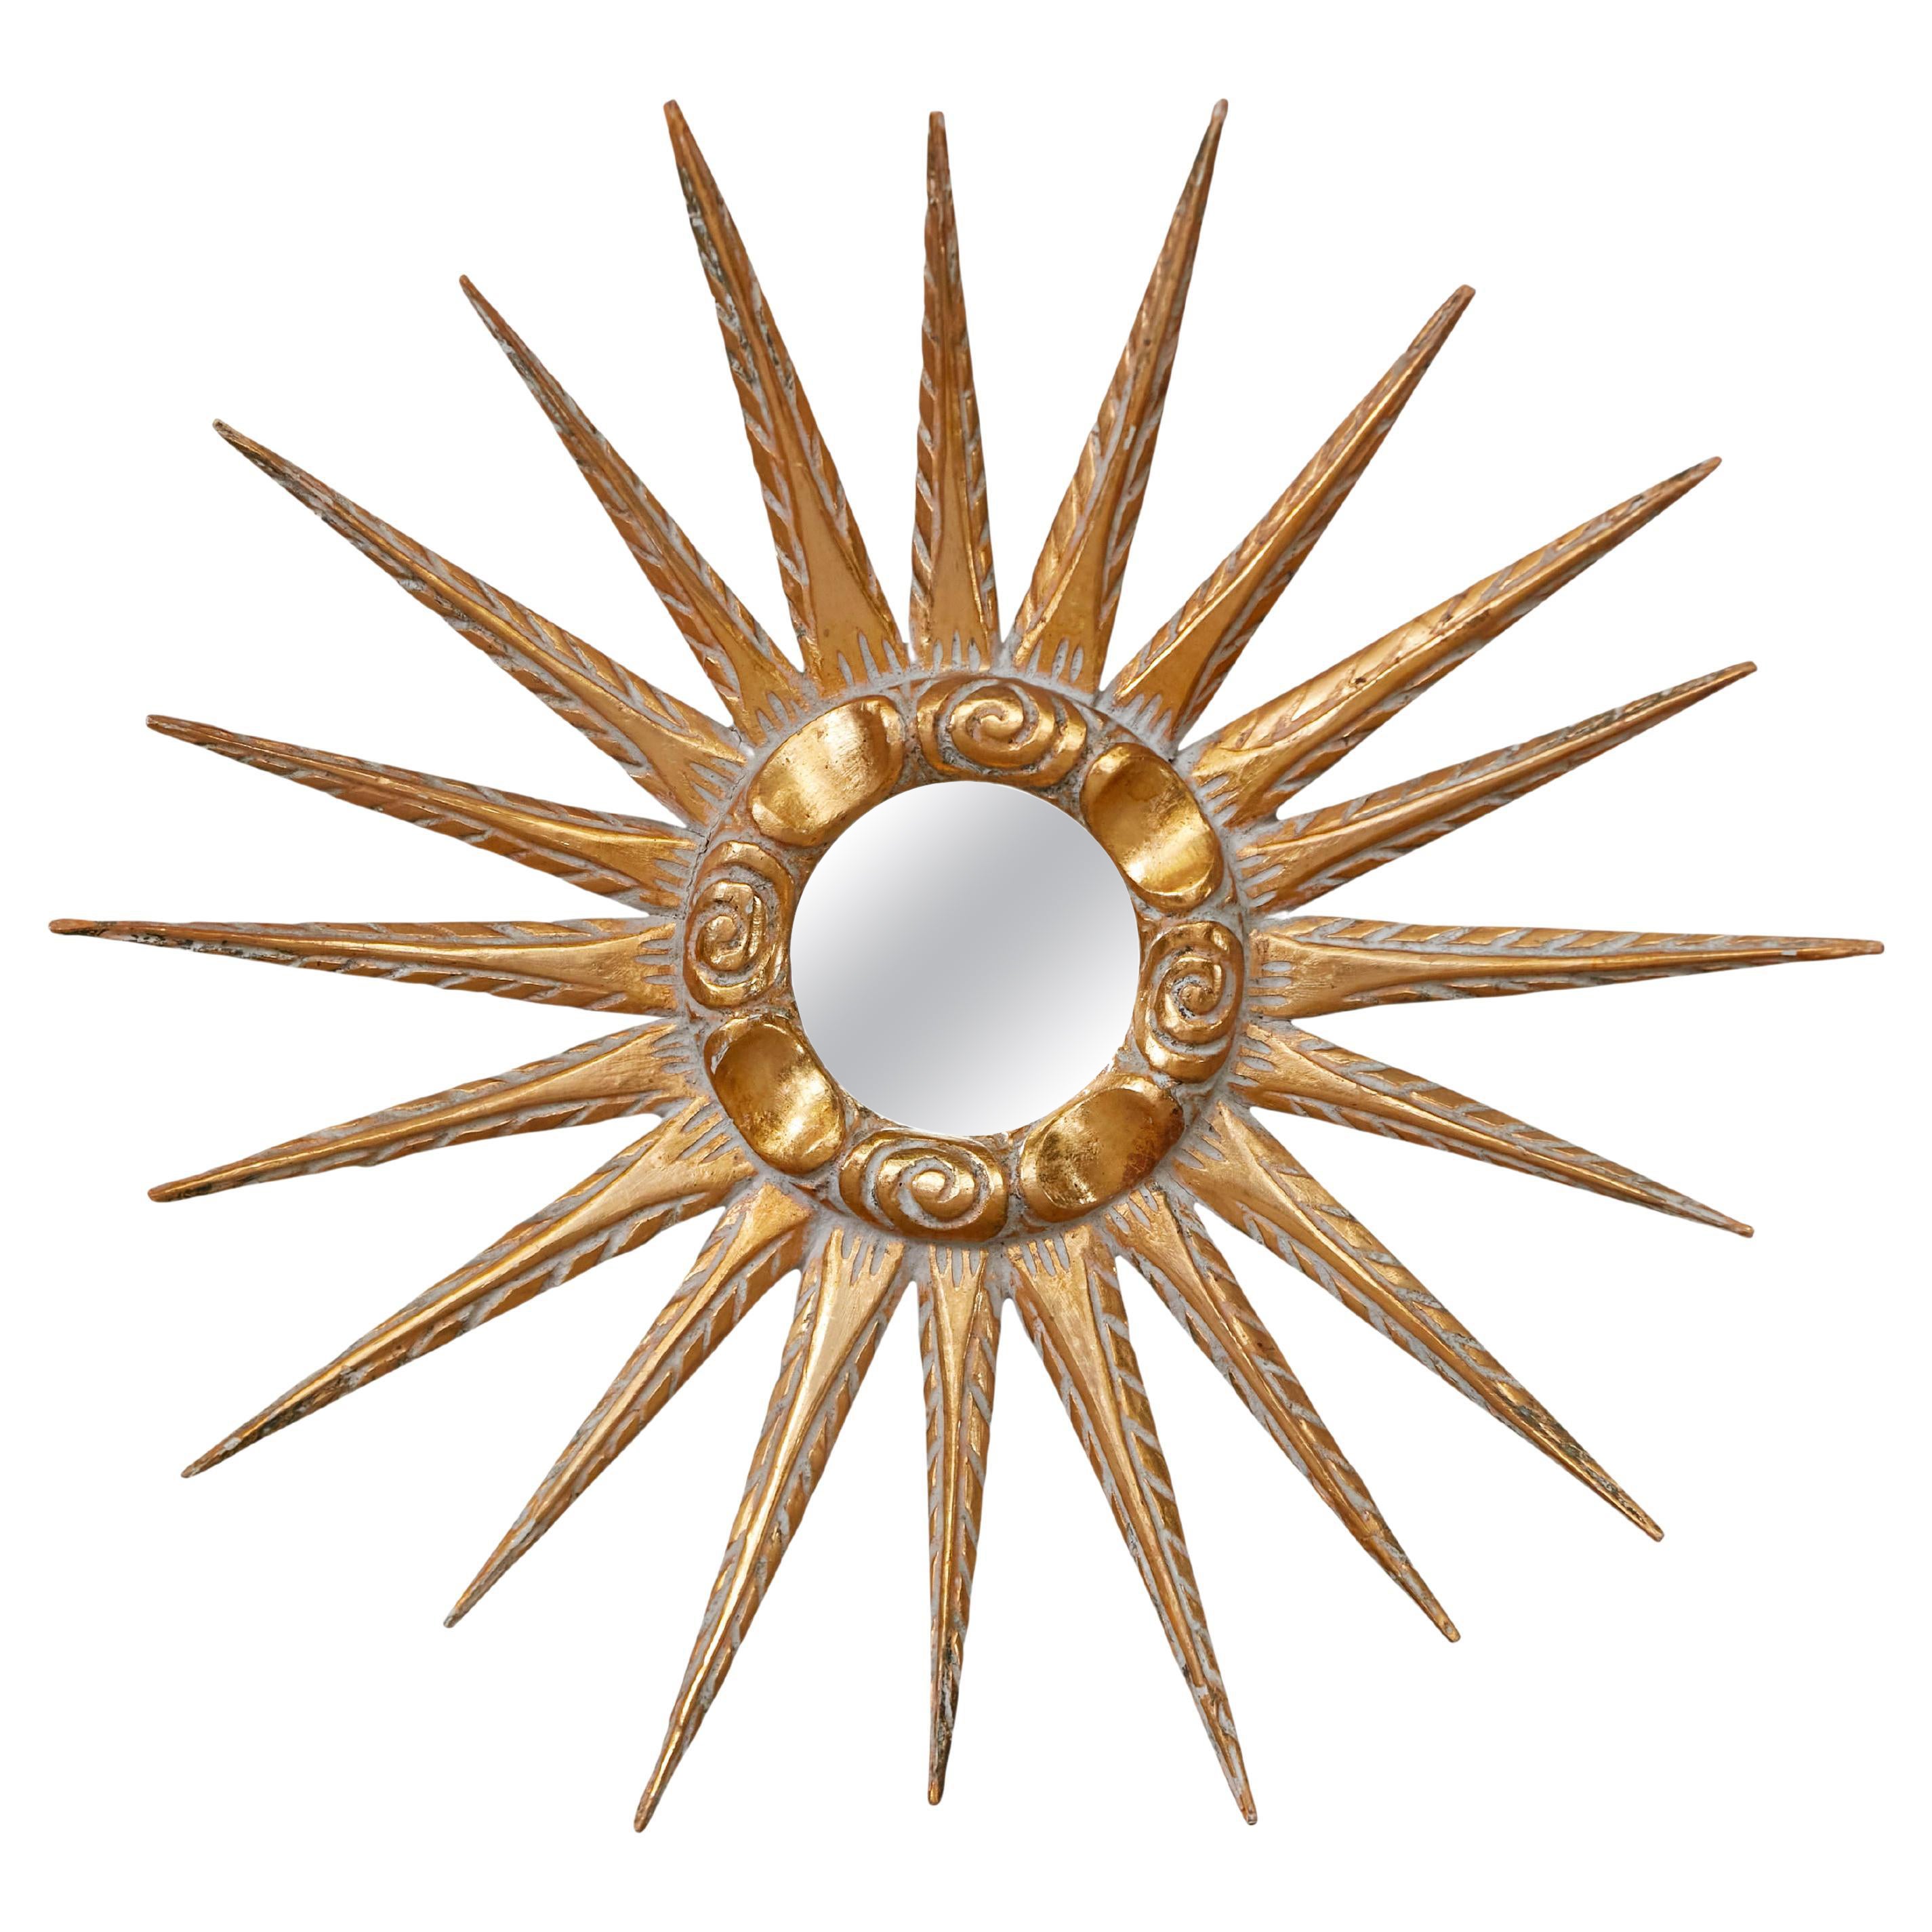 Midcentury French Giltwood Sunburst Mirror with Cloudy Frame, circa 1950